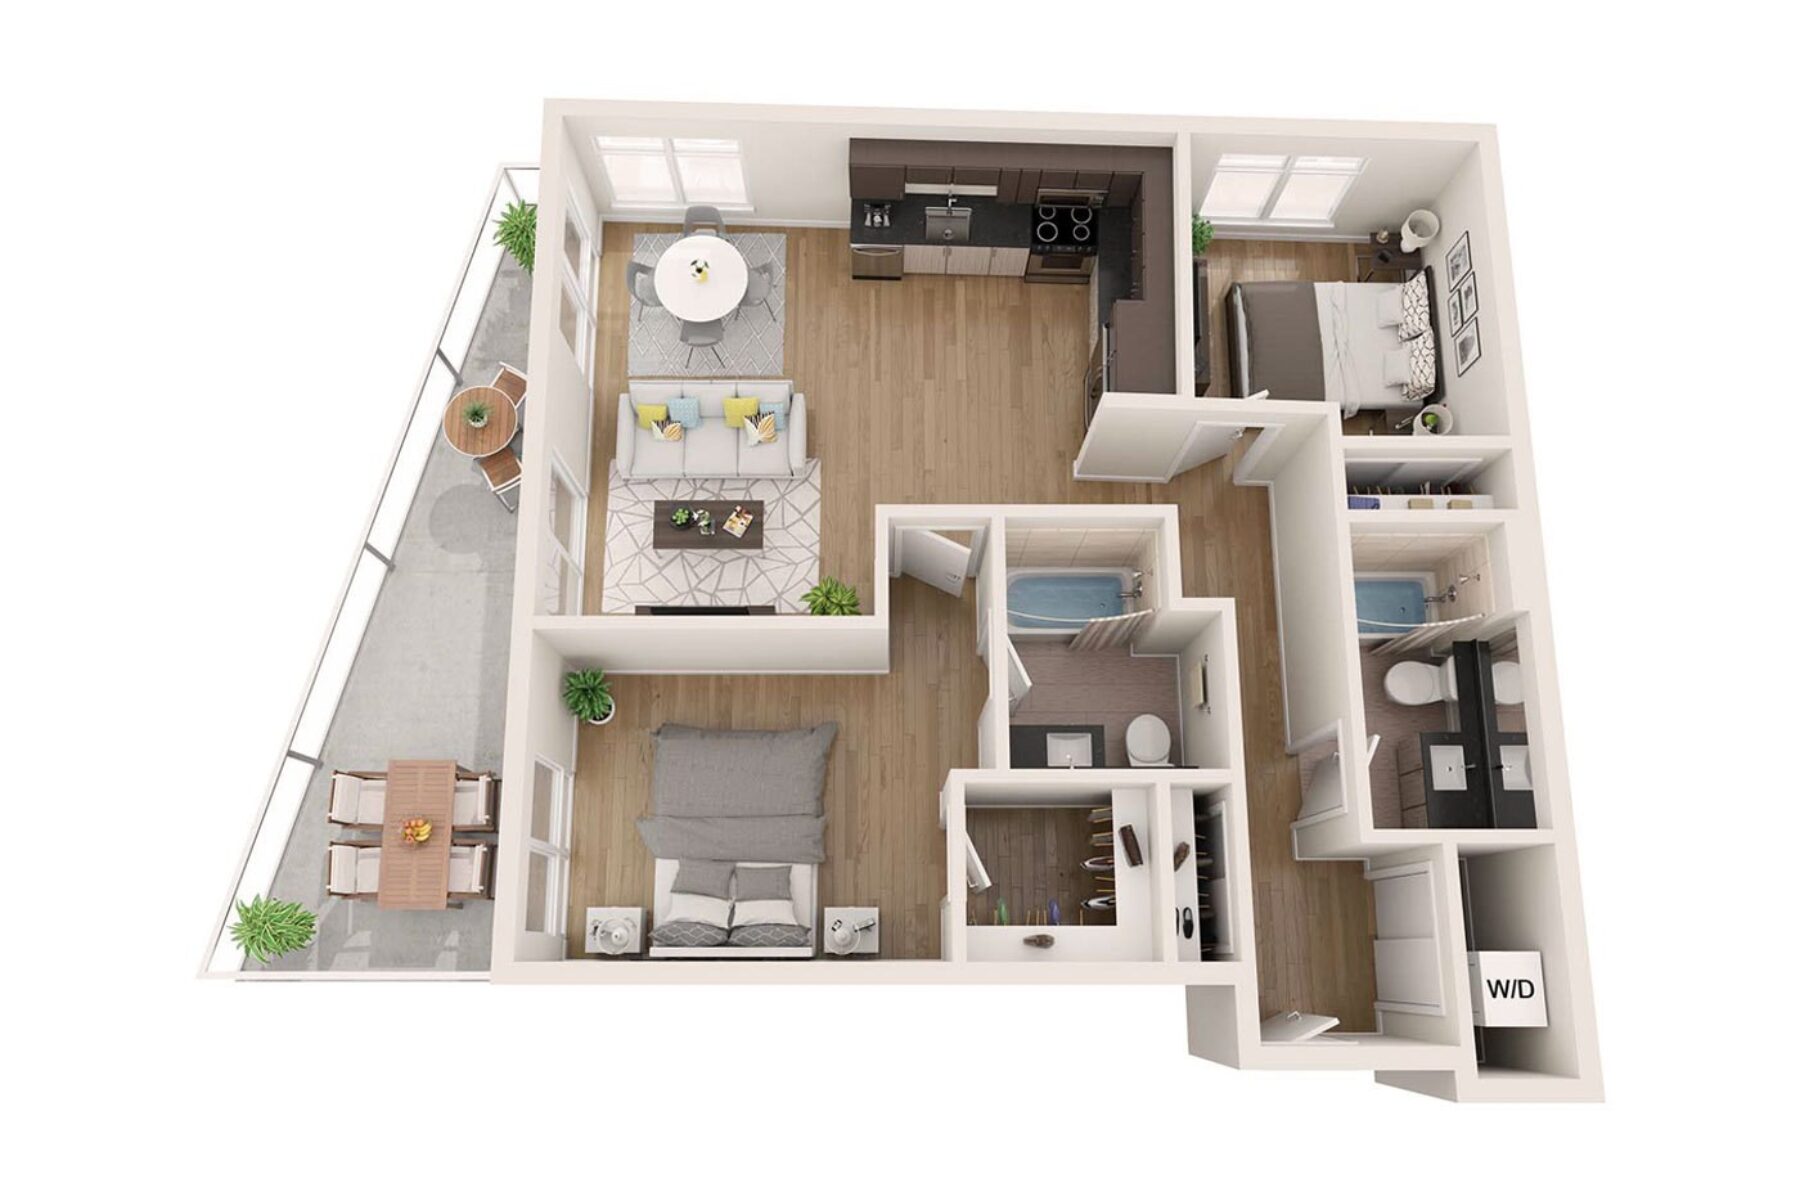 Plan Image: 2.5 - Two Bedroom w/ Private Deck